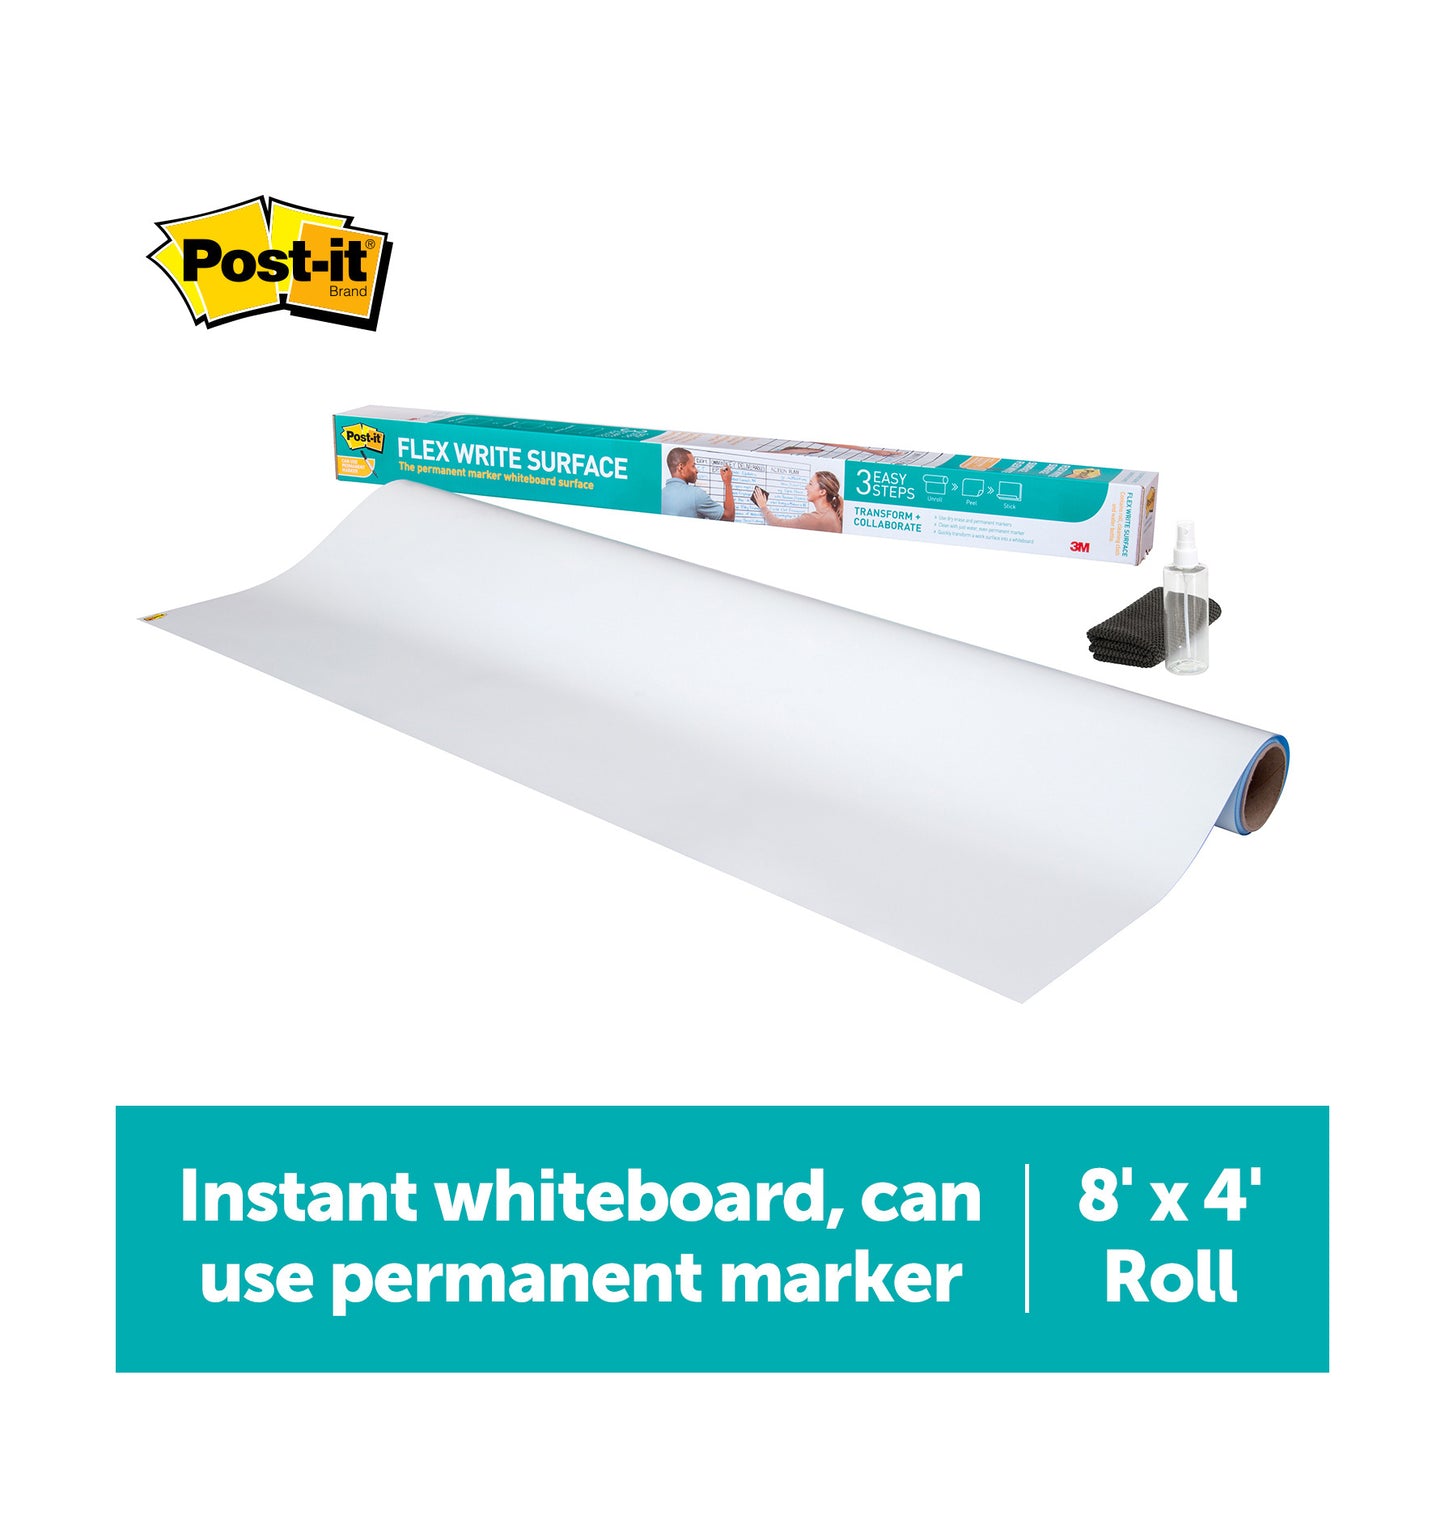 3M Post-it® Super Sticky Dry Erase Whiteboard Film - 1 / Pack